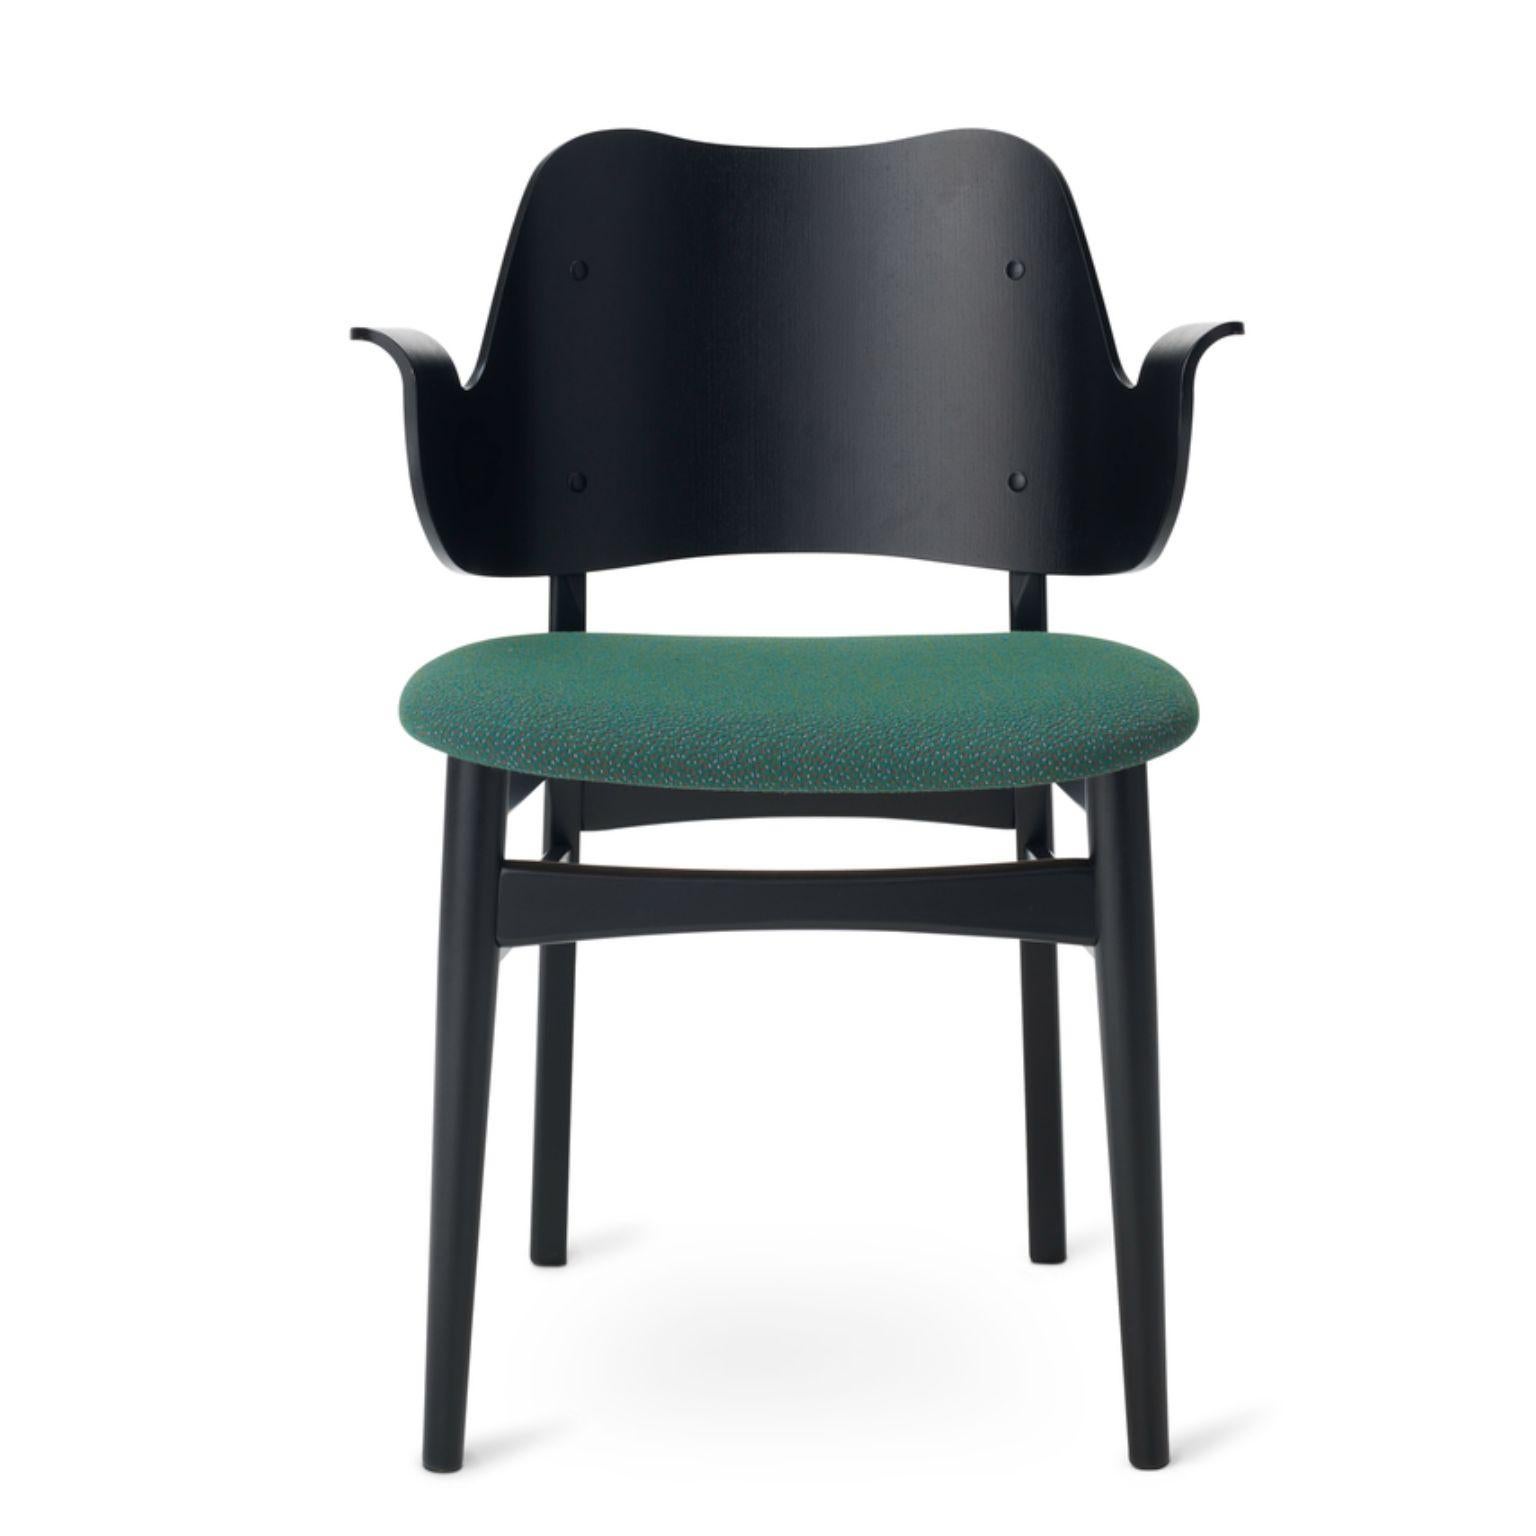 Gesture chair Black Beech Hunter Green by Warm Nordic
Dimensions: D56 x W53 x H 80 cm
Material: Teak or white oiled solid oak, Black lacquered solid beech, Veneer seat and back, textile upholstery
Weight: 7.5 kg
Also available in different